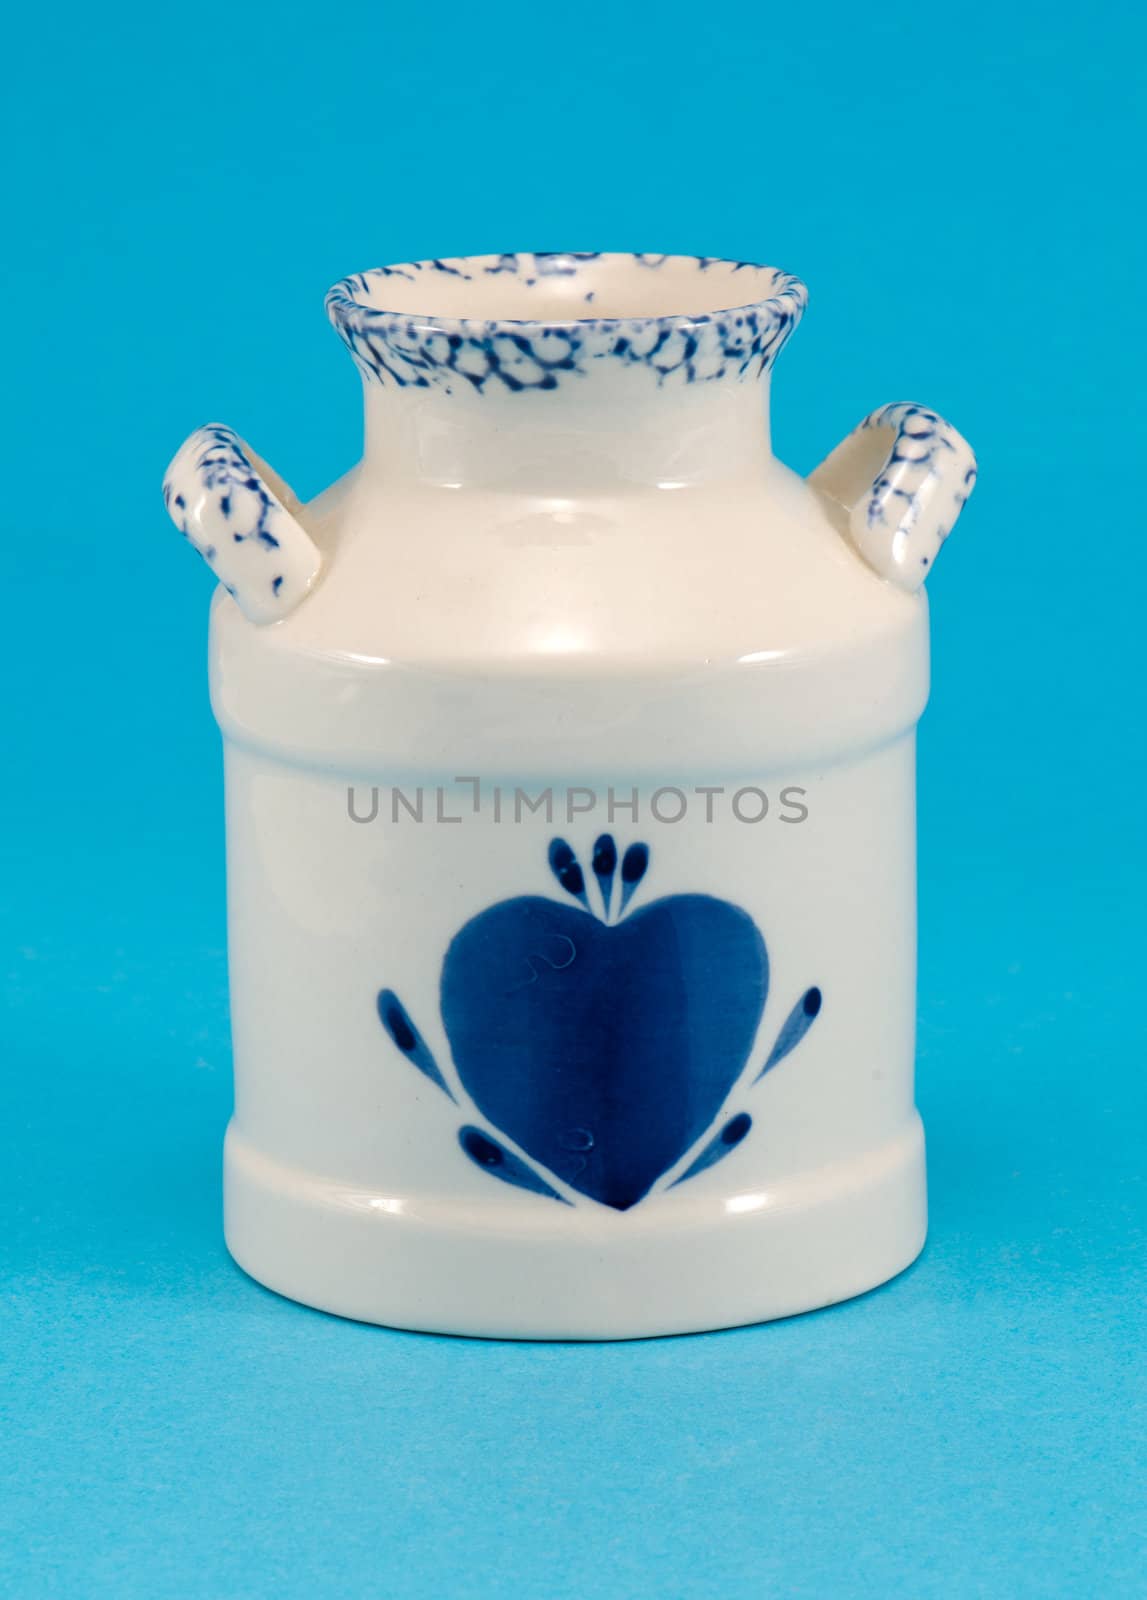 ceramic vase dish with blue heart in center on blue background.